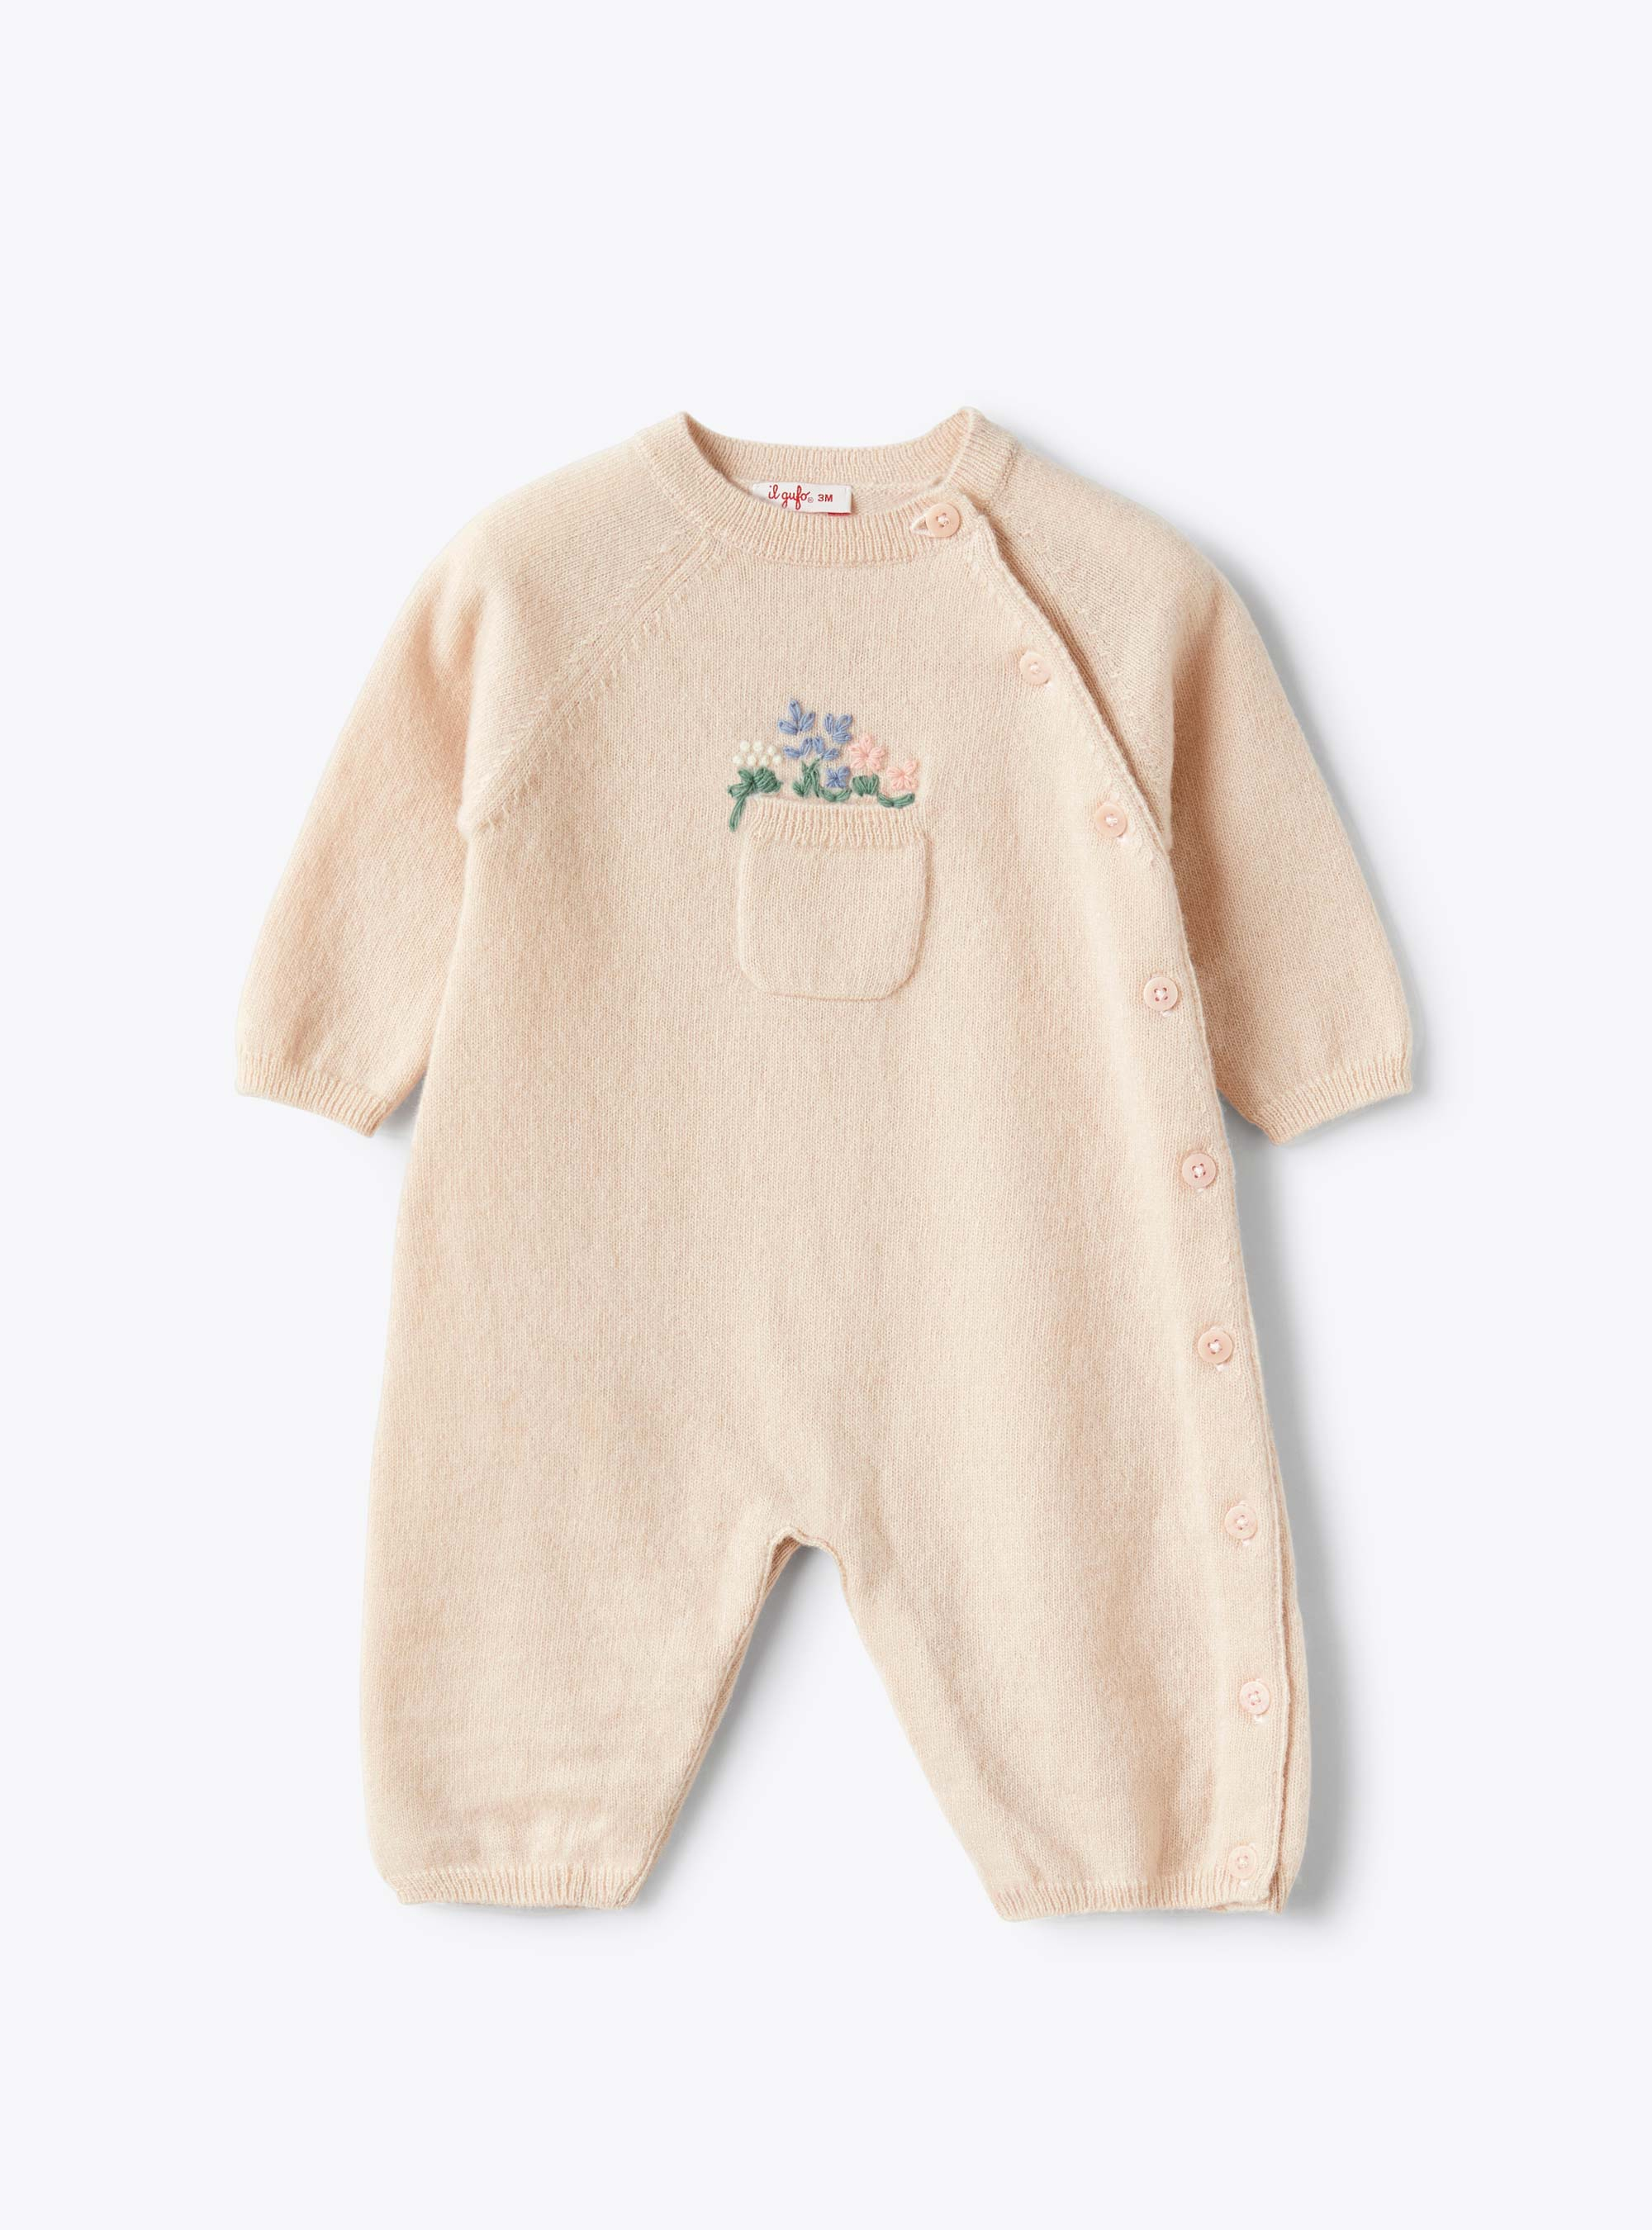 Tricot-knit babysuit with embroidered flowers - Babygrows - Il Gufo